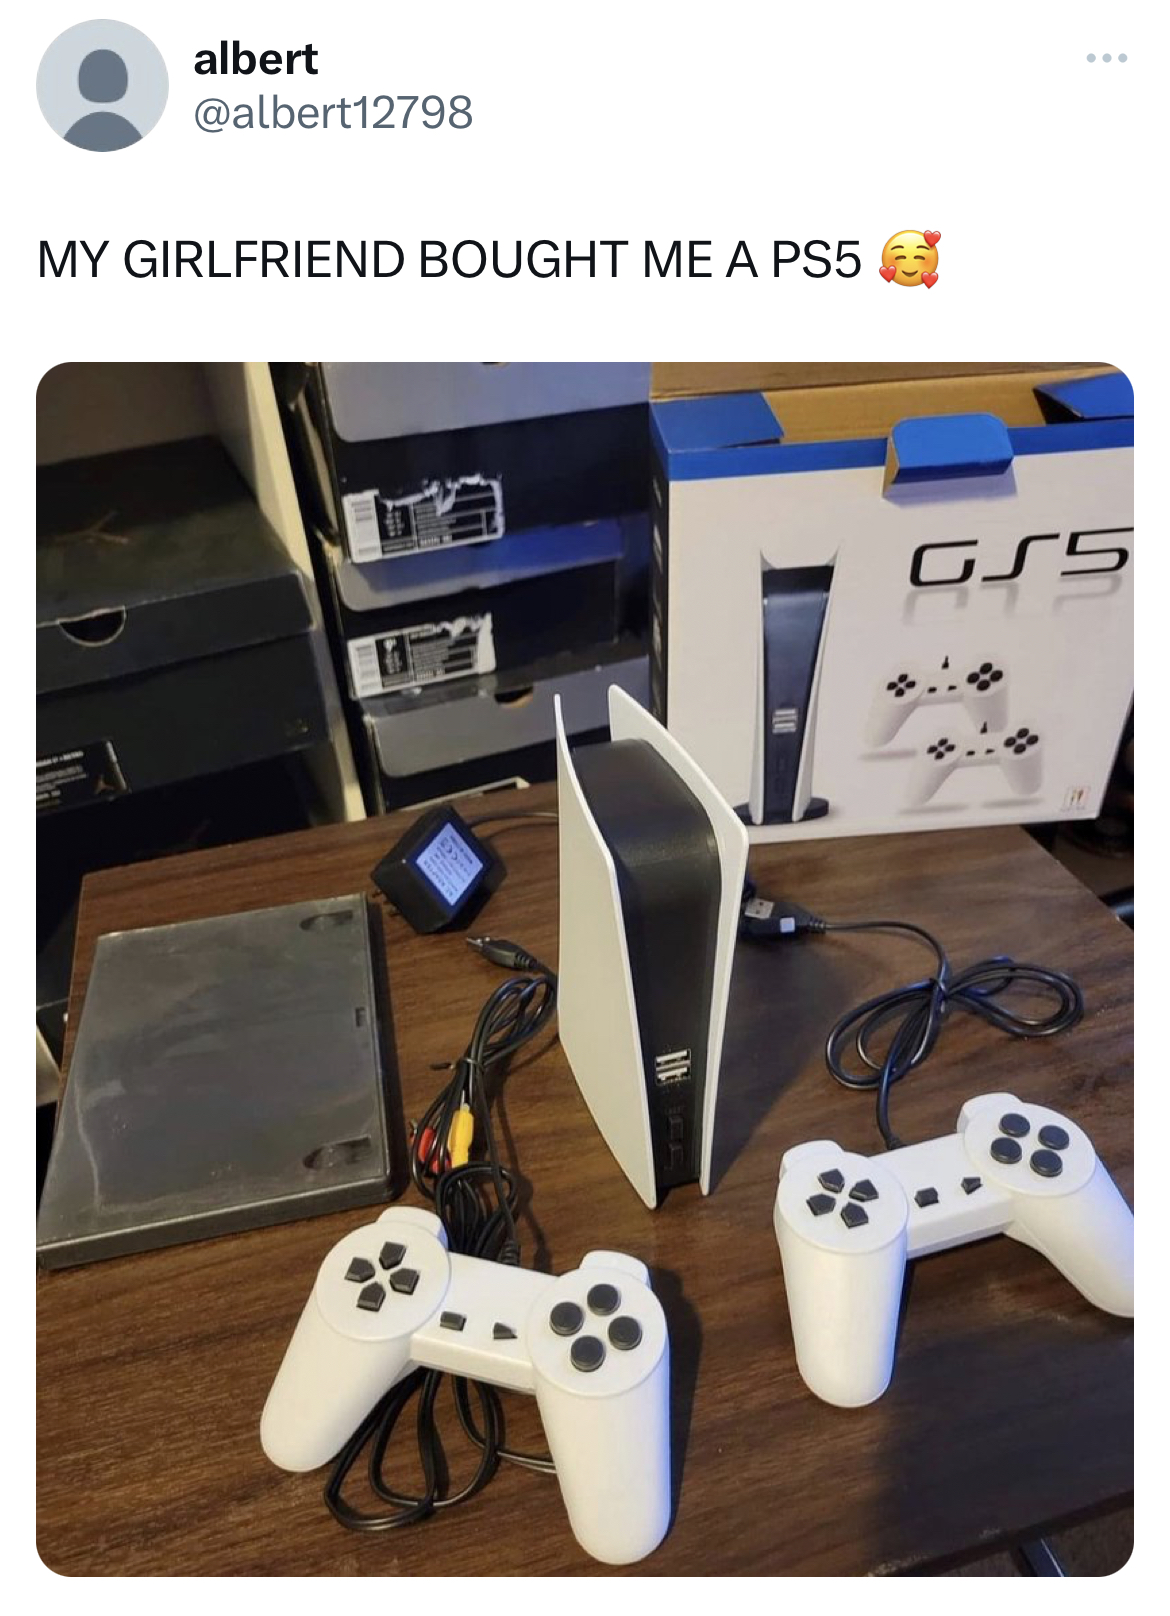 savage tweets game controller - albert My Girlfriend Bought Me A PS5 Gss